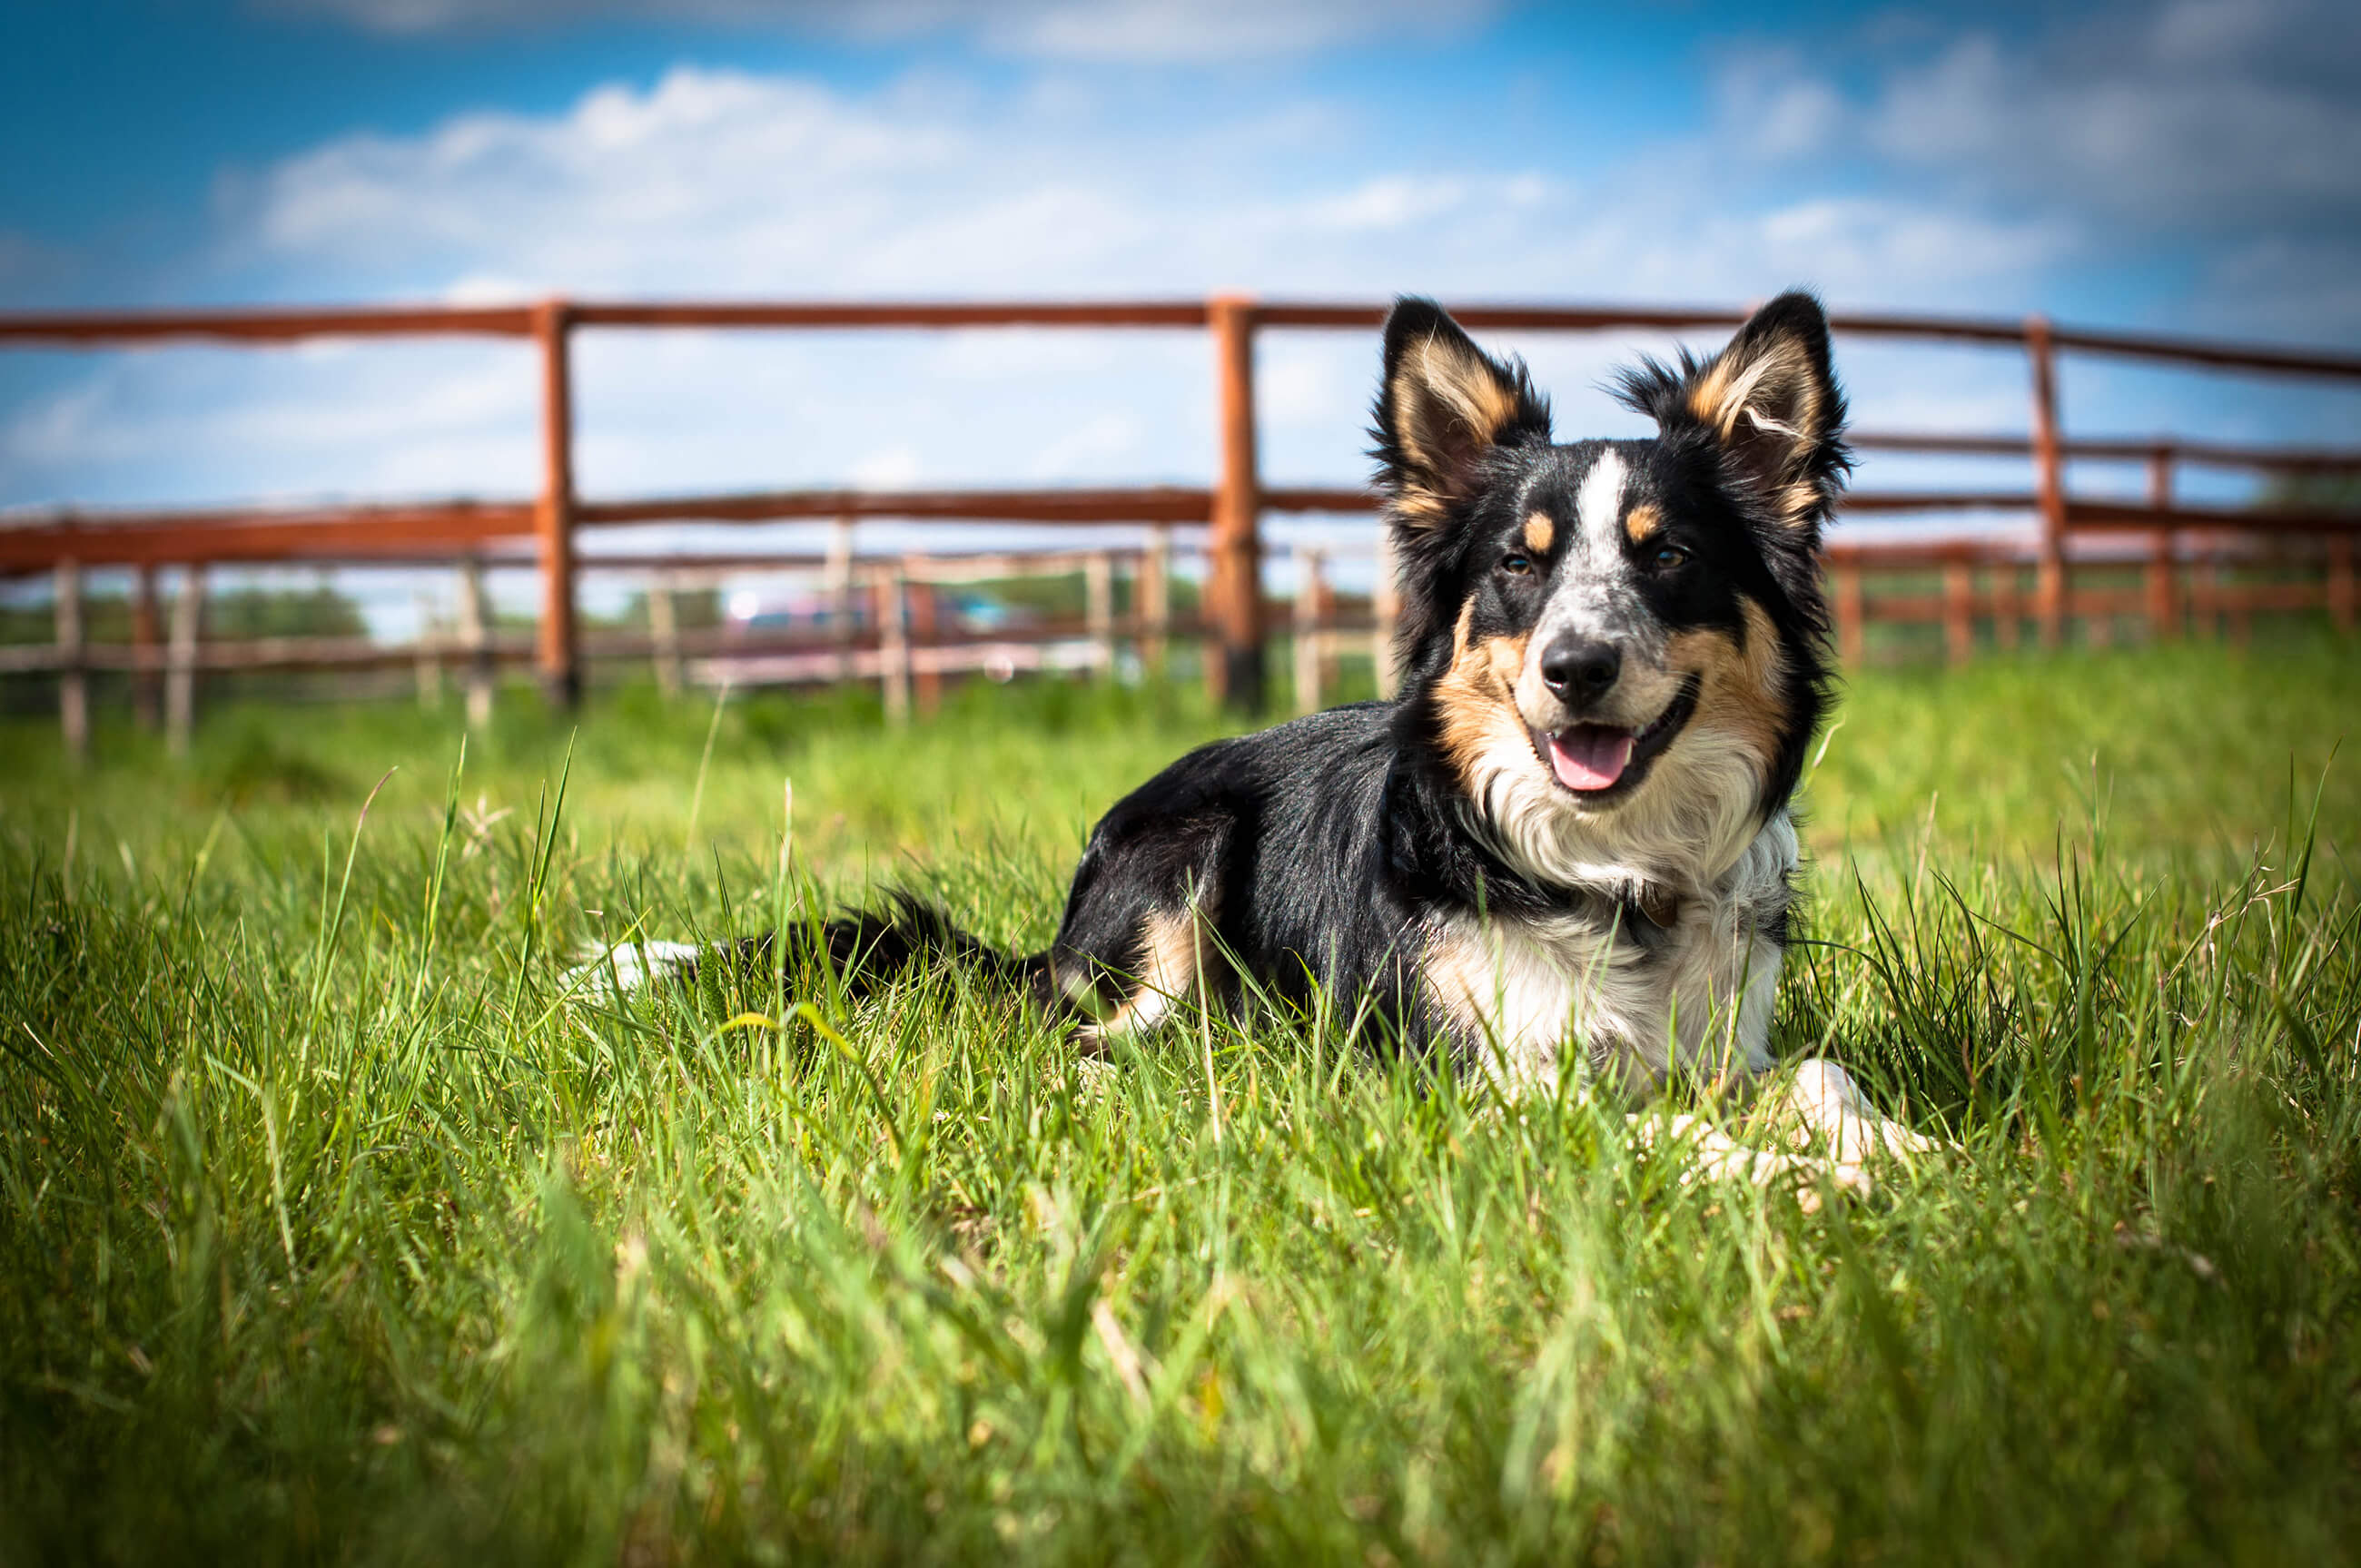 A black, white and brown herding dog laying down in a farm field